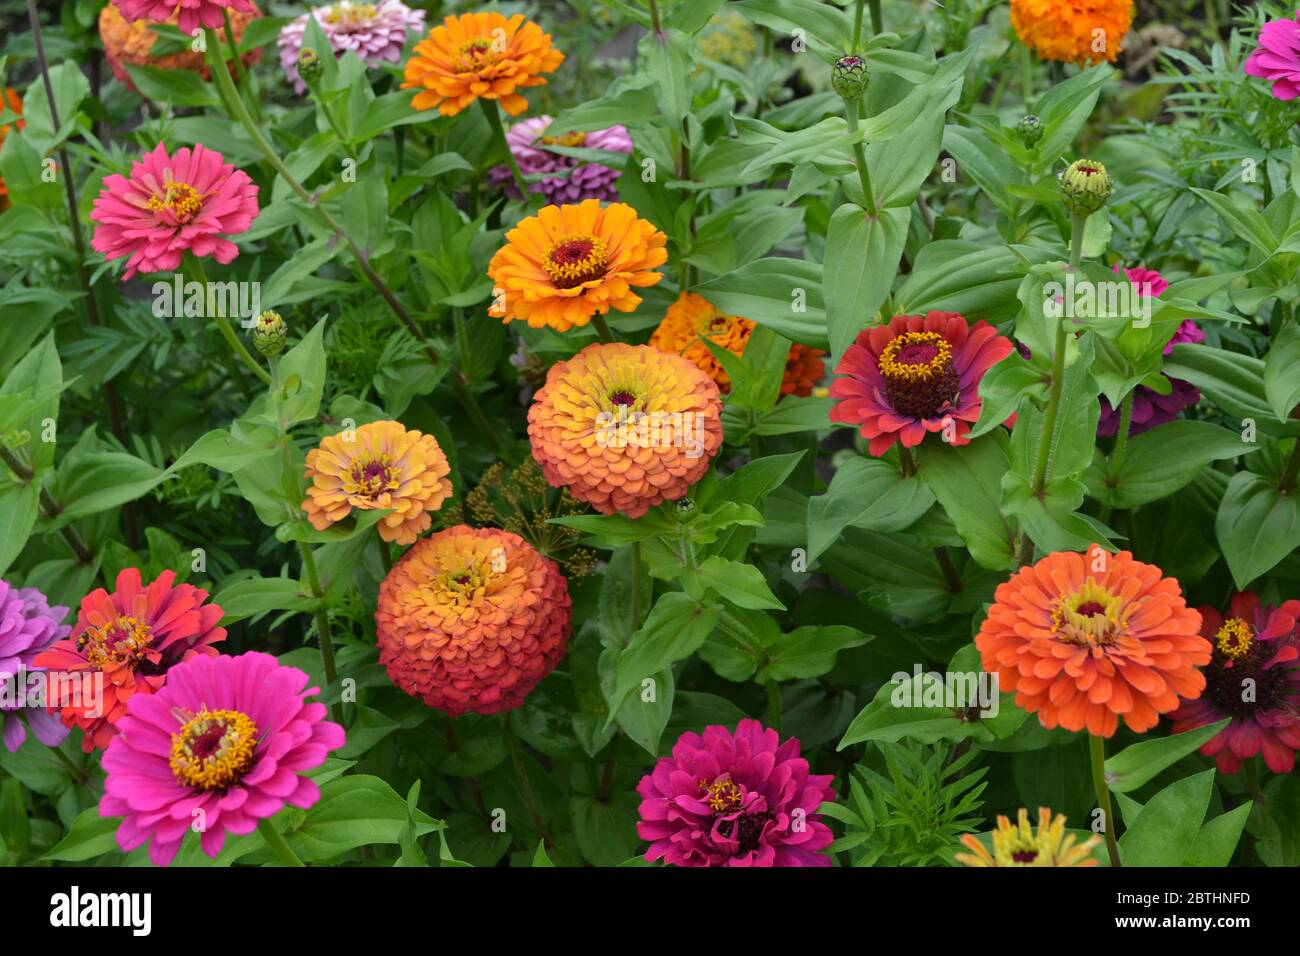 Zinnia A Genus Of Annual And Perennial Grasses And Dwarf Shrubs Of The Asteraceae Family Flower Zinnia Gardening Home Red Flowers Stock Photo Alamy